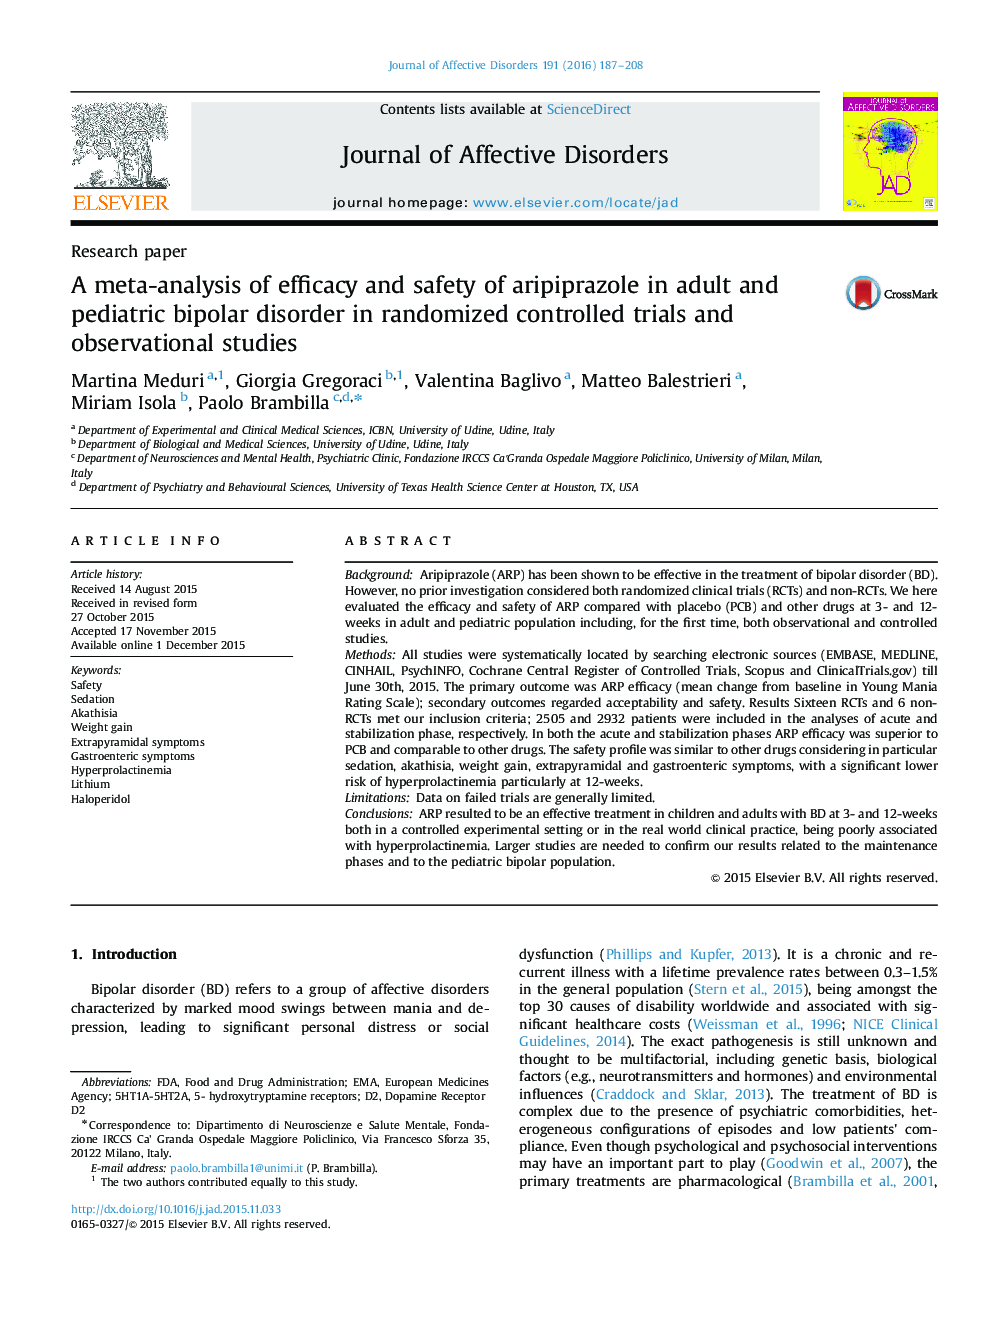 A meta-analysis of efficacy and safety of aripiprazole in adult and pediatric bipolar disorder in randomized controlled trials and observational studies